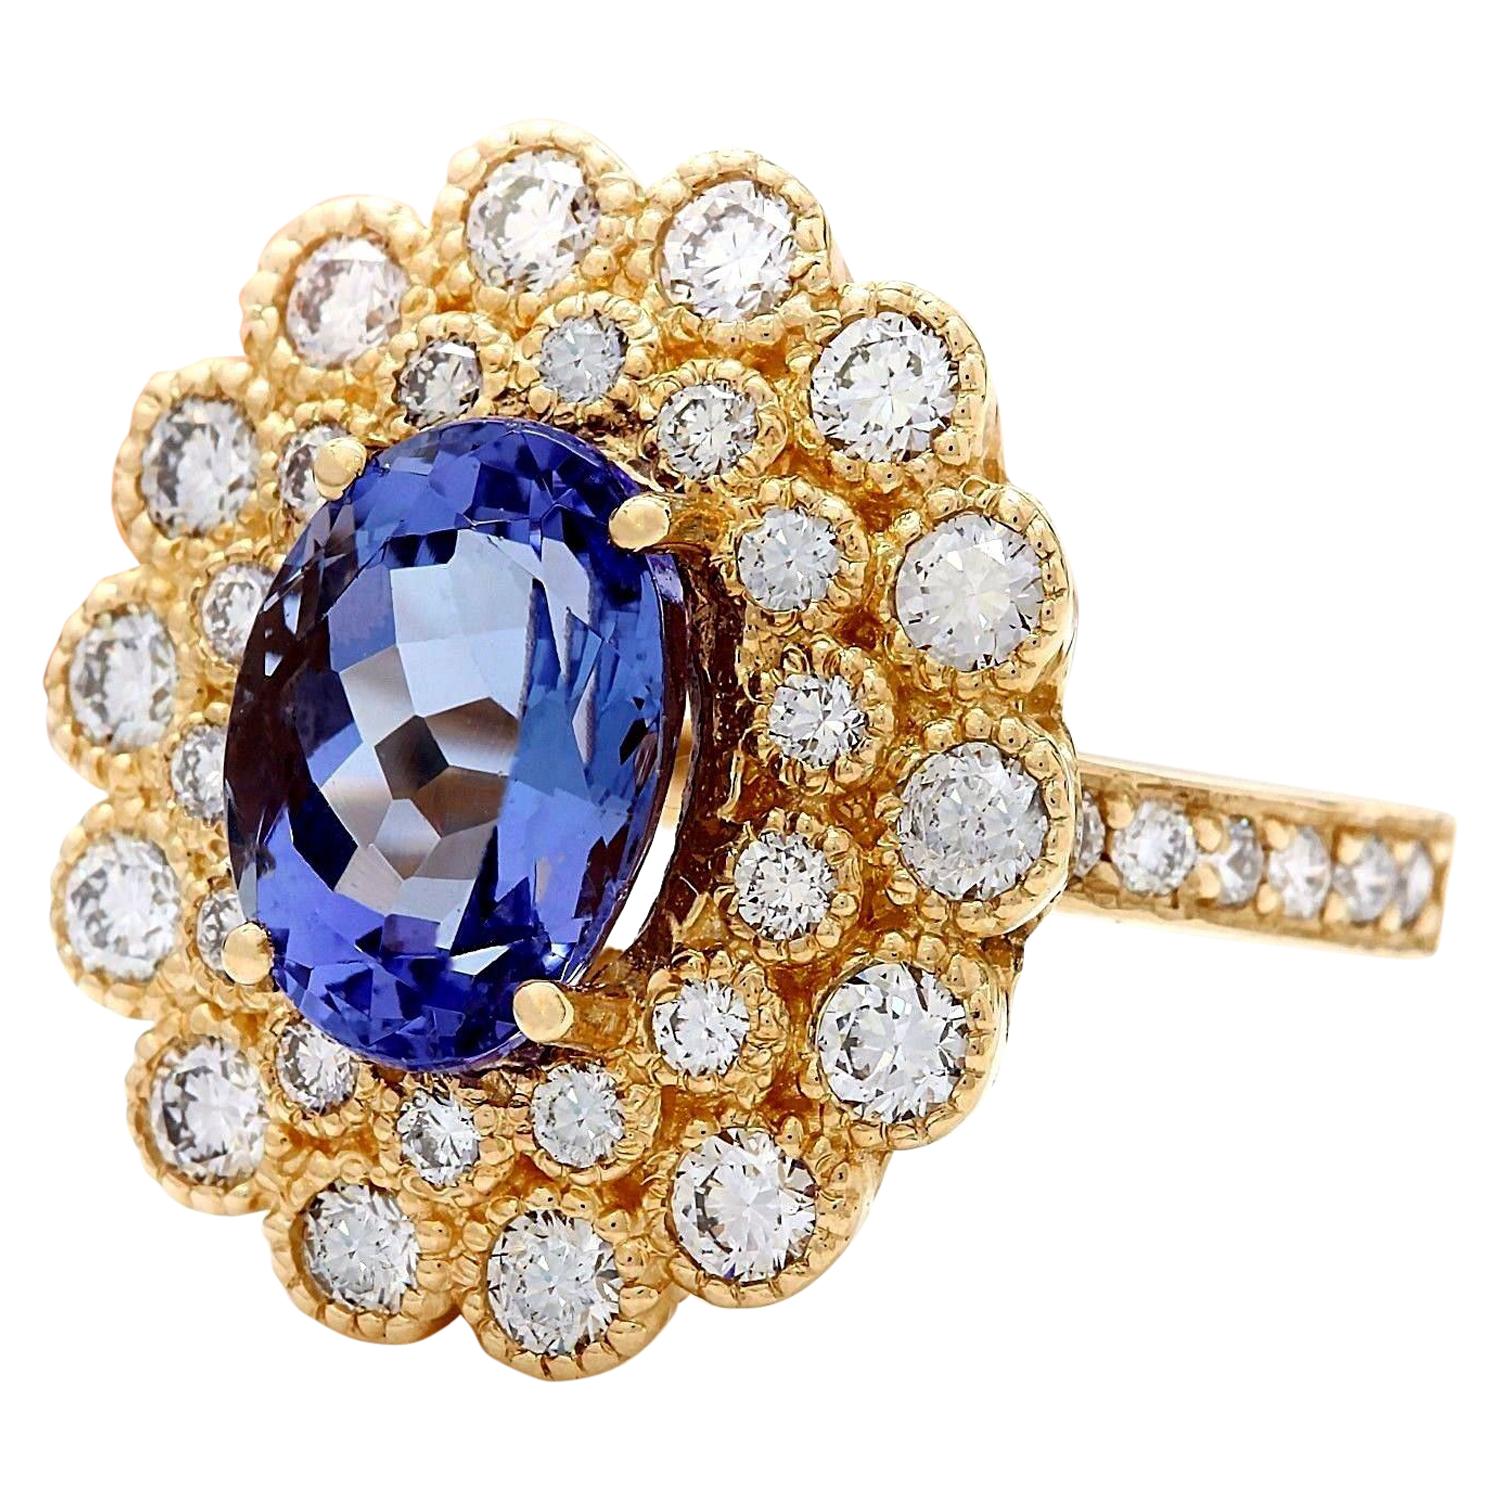 5.49 Carat Natural Tanzanite 14K Solid Yellow Gold Diamond Ring
 Item Type: Ring
 Item Style: Cocktail
 Material: 14K Yellow Gold
 Mainstone: Tanzanite
 Stone Color: Blue
 Stone Weight: 3.94 Carat
 Stone Shape: Oval
 Stone Quantity: 1
 Stone